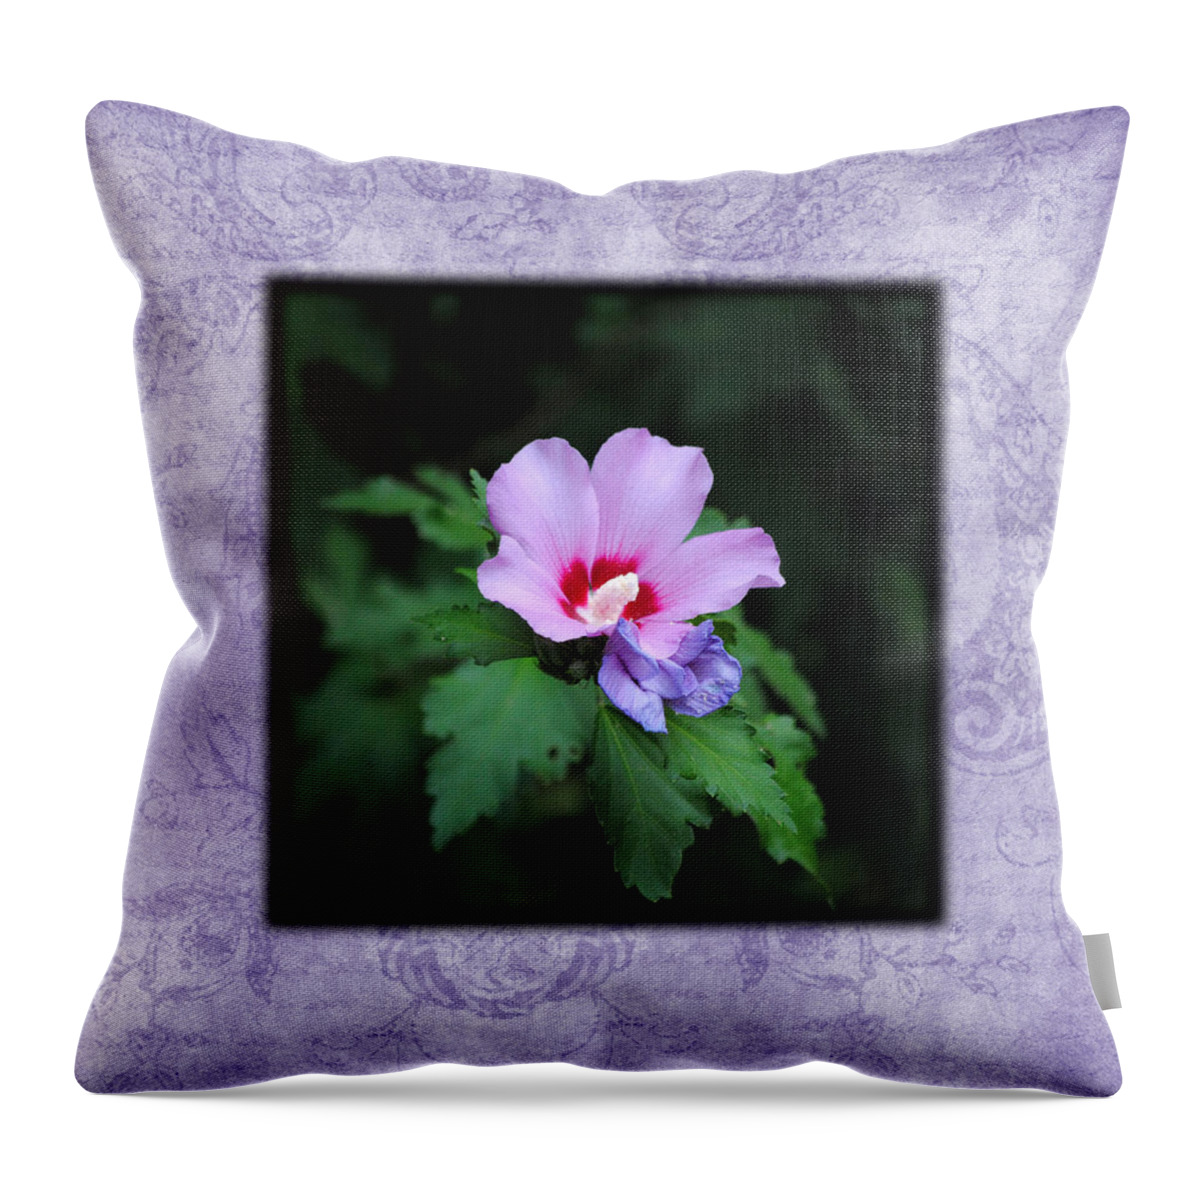 Hibiscus Throw Pillow featuring the photograph Hibiscus I Photo Square by Jai Johnson